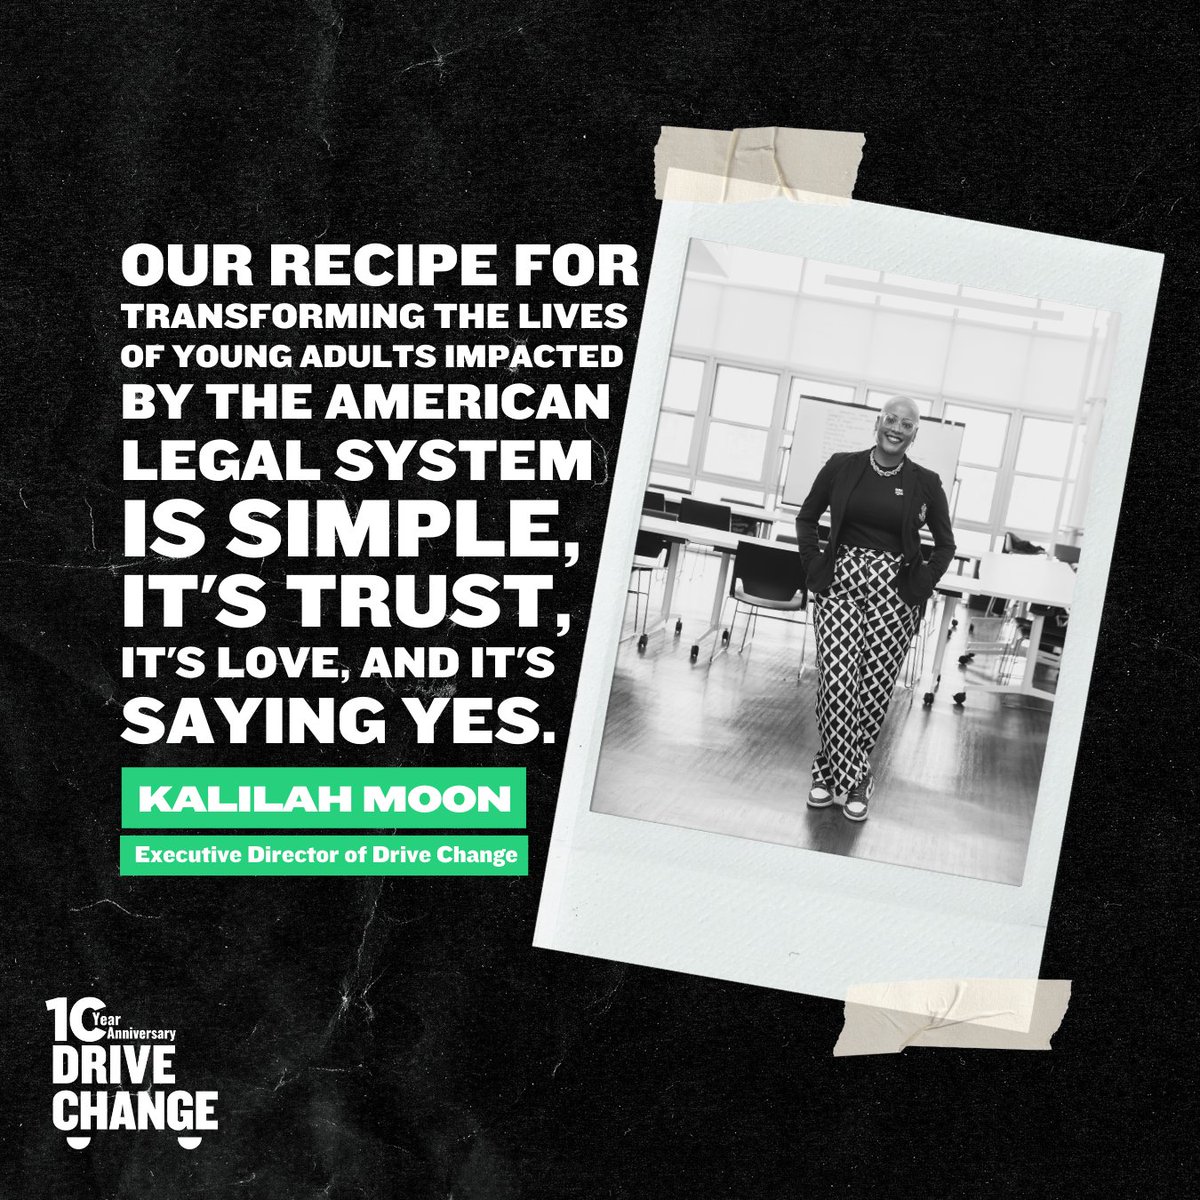 TRUTH, LOVE, AND SAYING YES 📷 Help us continue to transform the lives of young adults. Click to DONATE TODAY 📷 drivechange-bloom.kindful.com